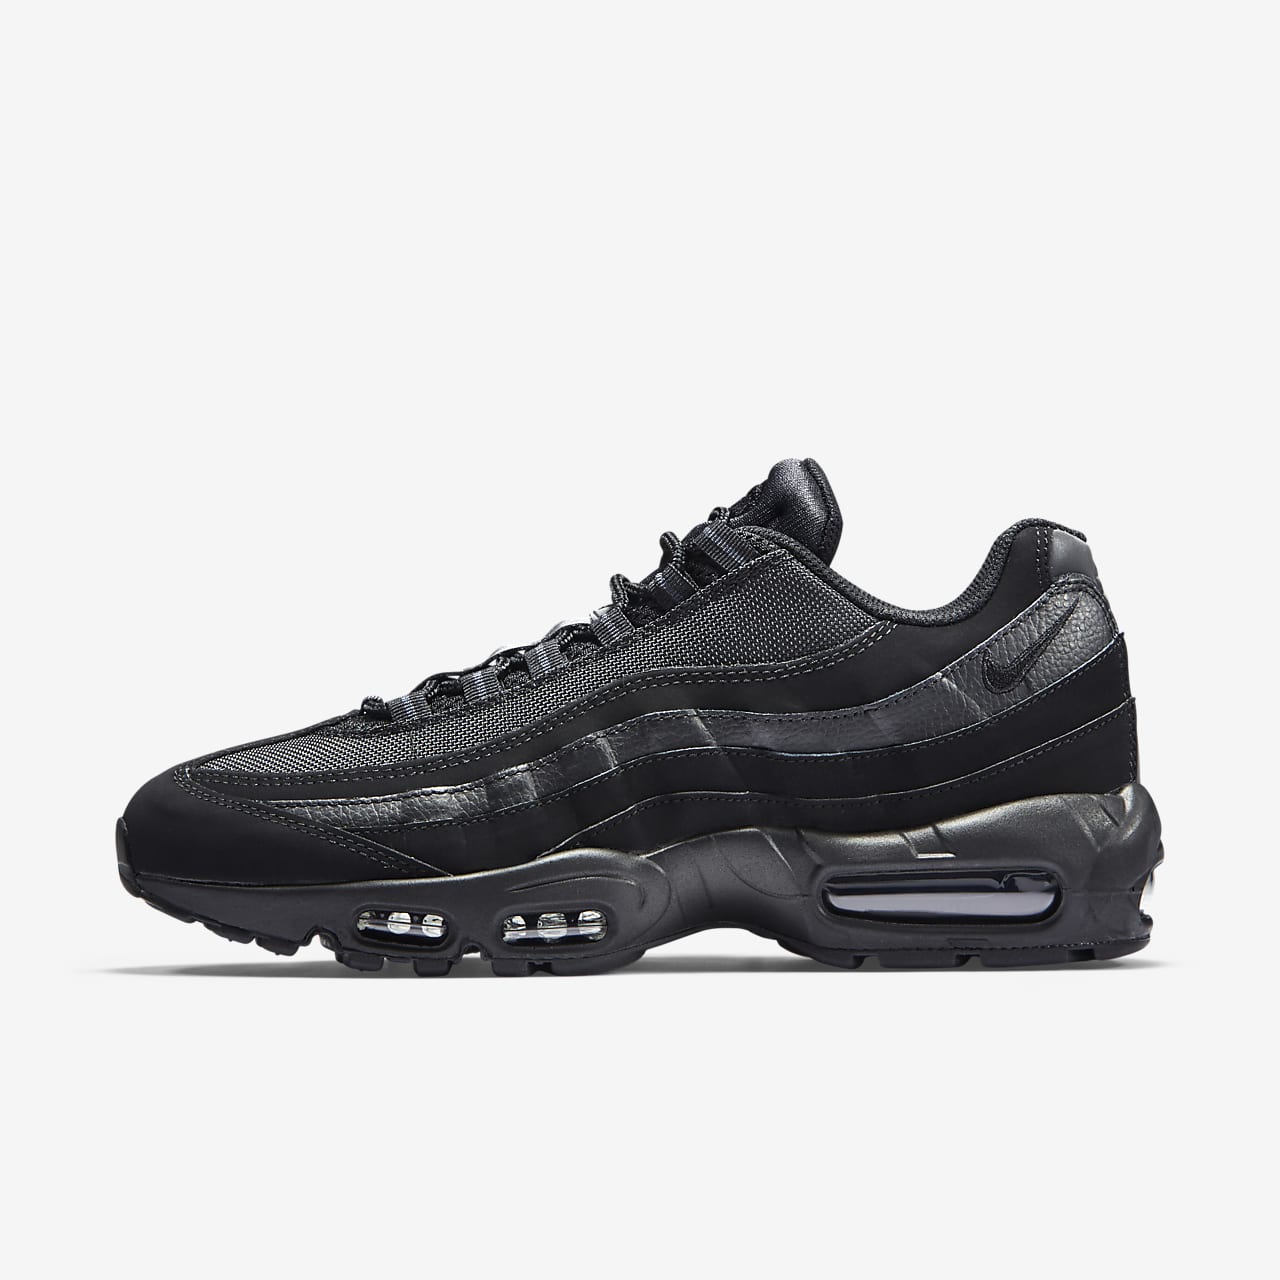 nike baskets air max 95 homme off 70% -